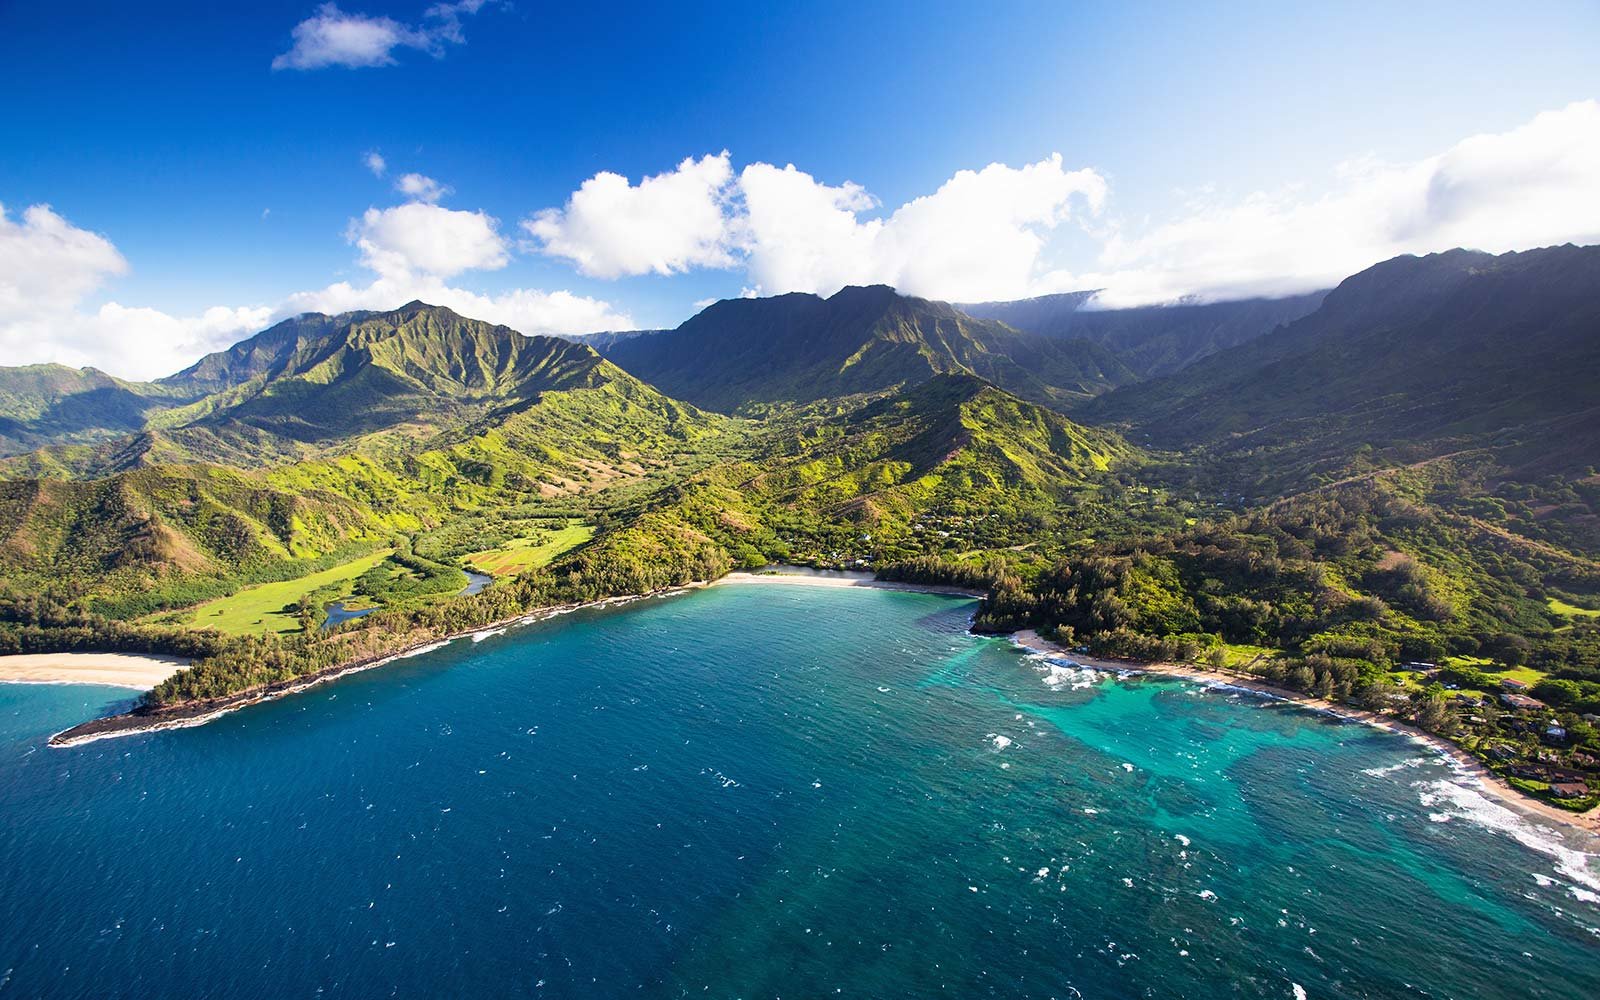 90% Of People Will Fail This General Knowledge Quiz. Will You? Kauai